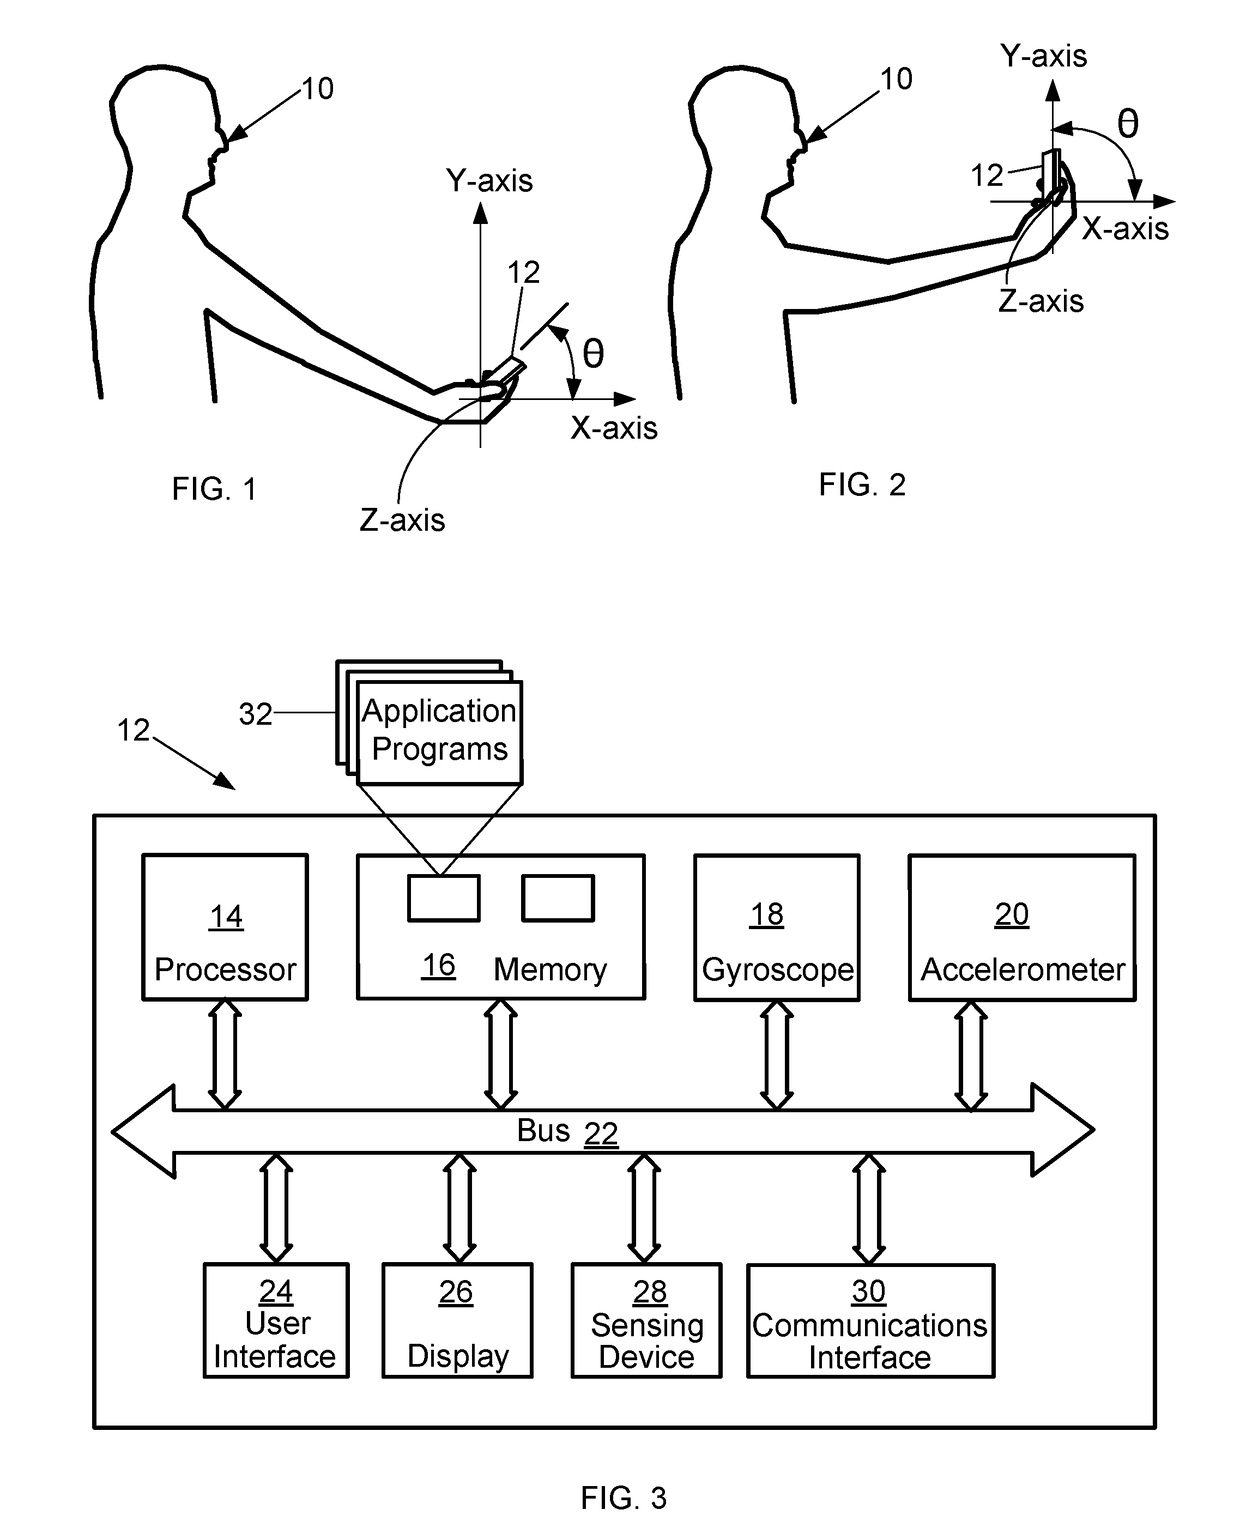 Methods and systems for capturing biometric data